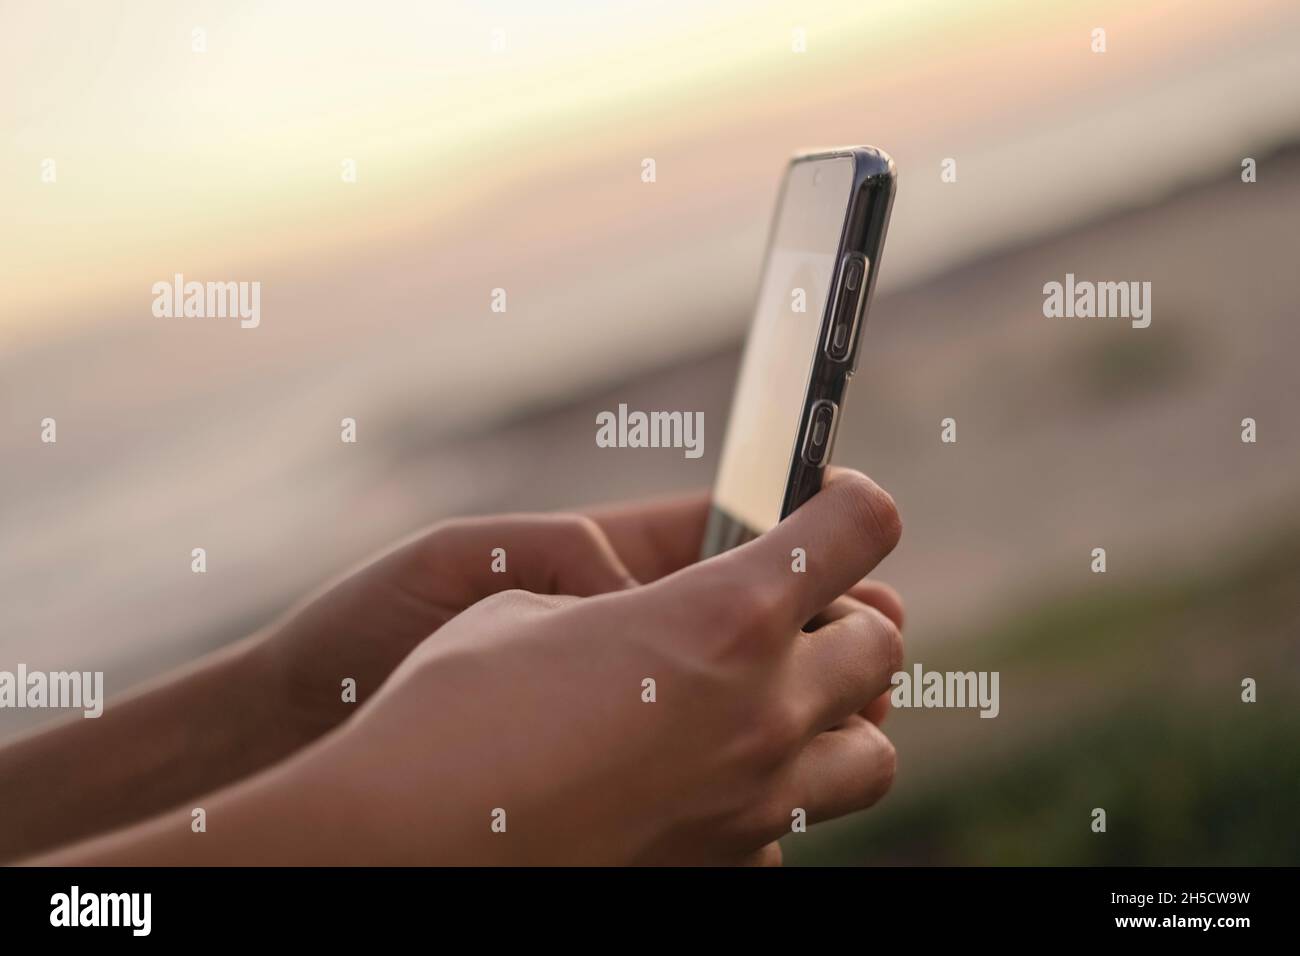 Young woman use smartphone for social media chat over sunset background,cell addiction,new era technology Stock Photo